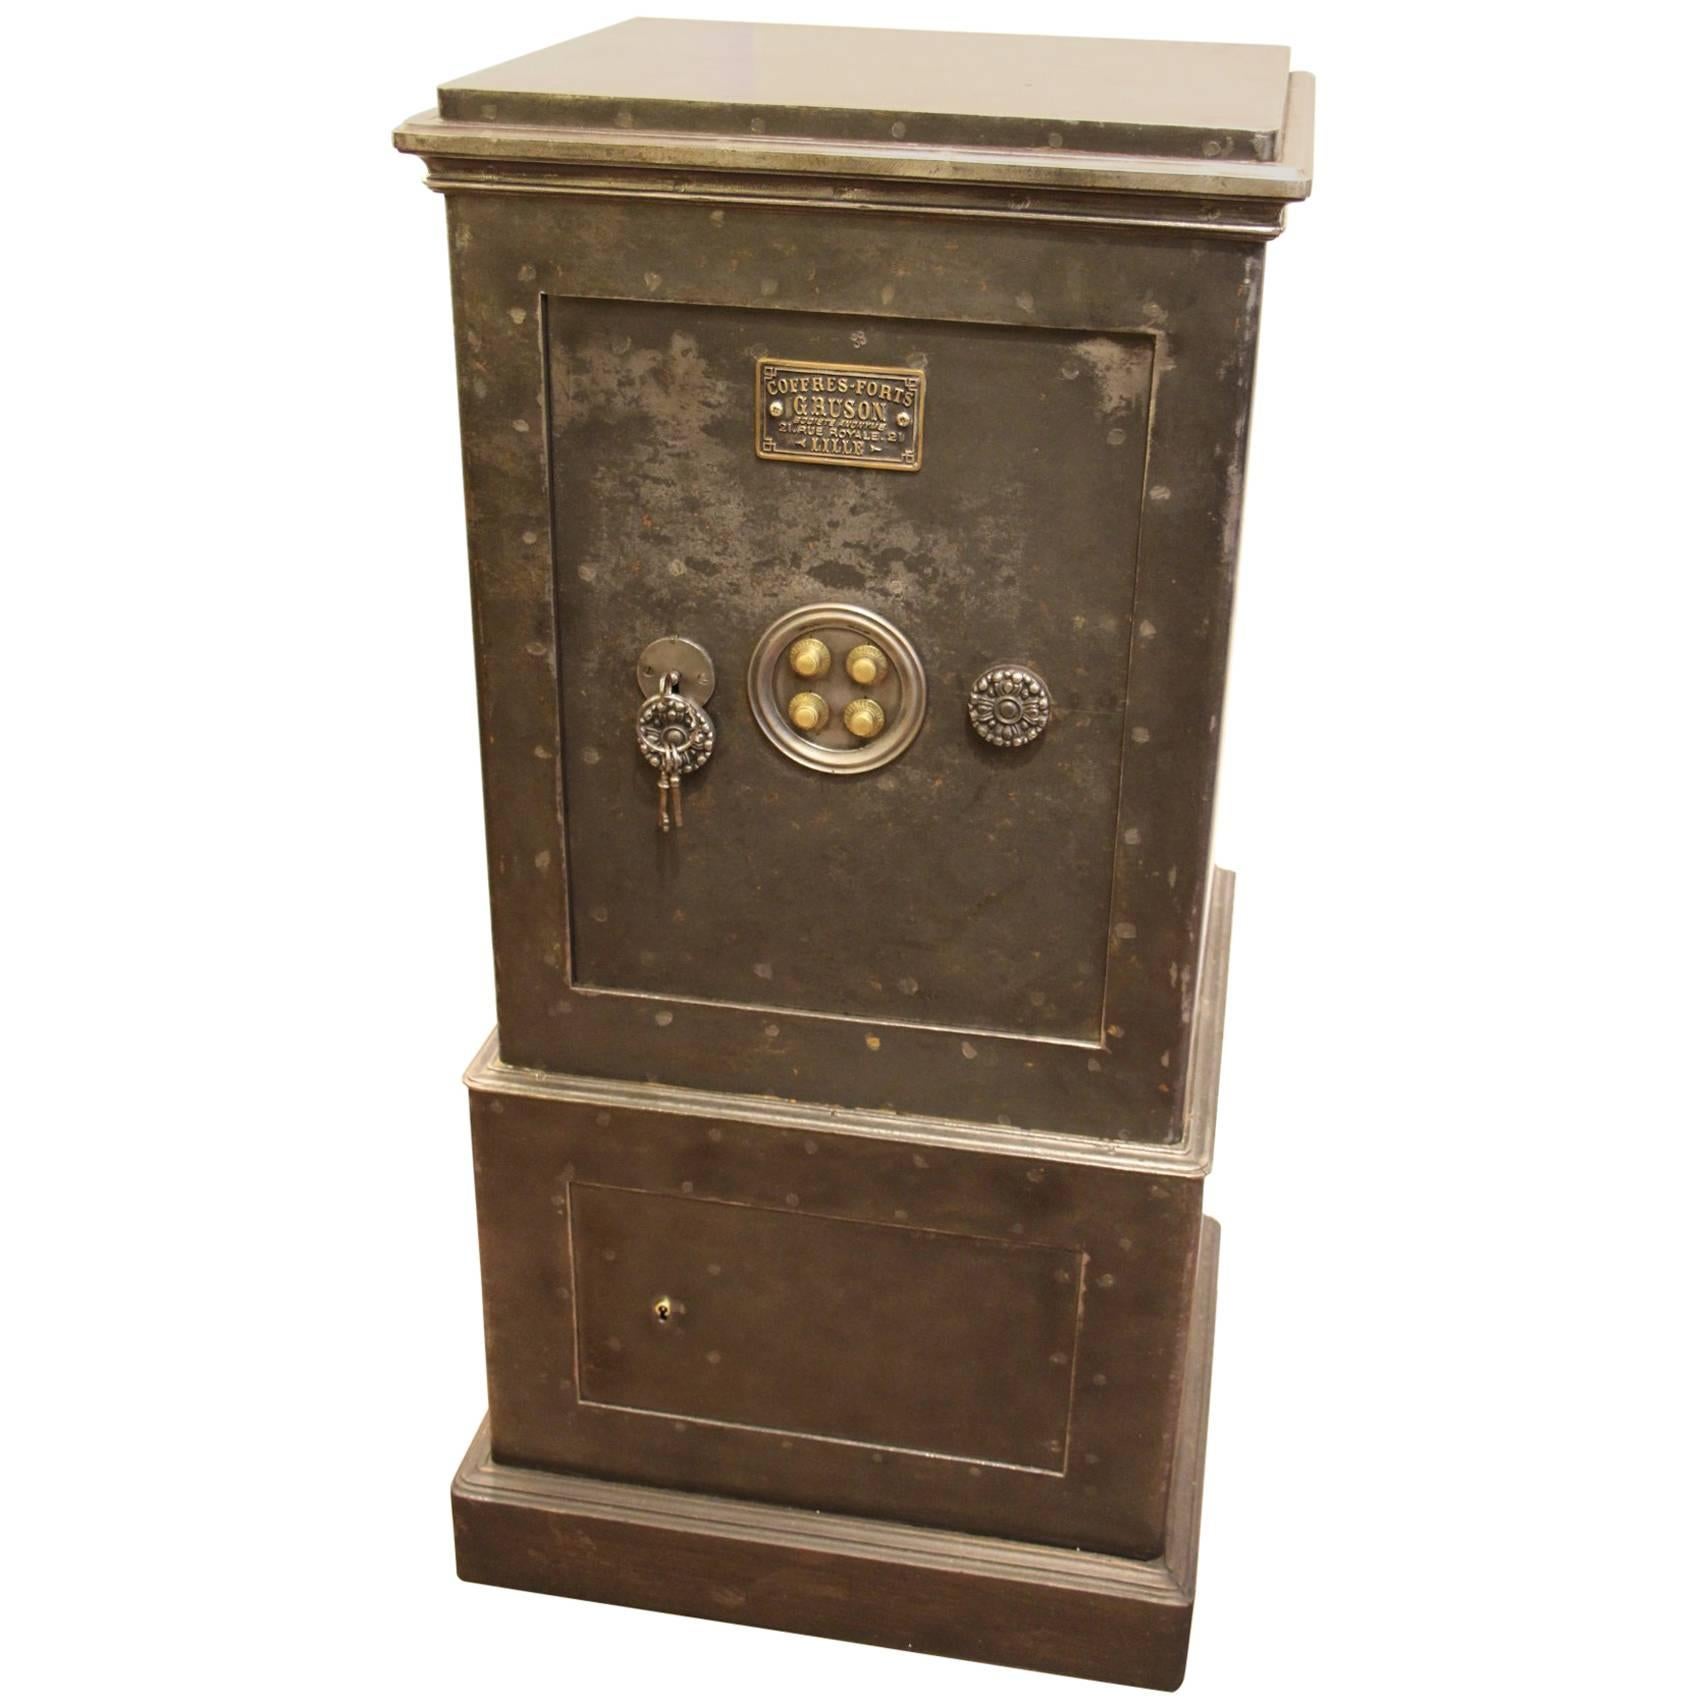 19th Century, Black Steel and Iron Safe with All Keys and Working Combination